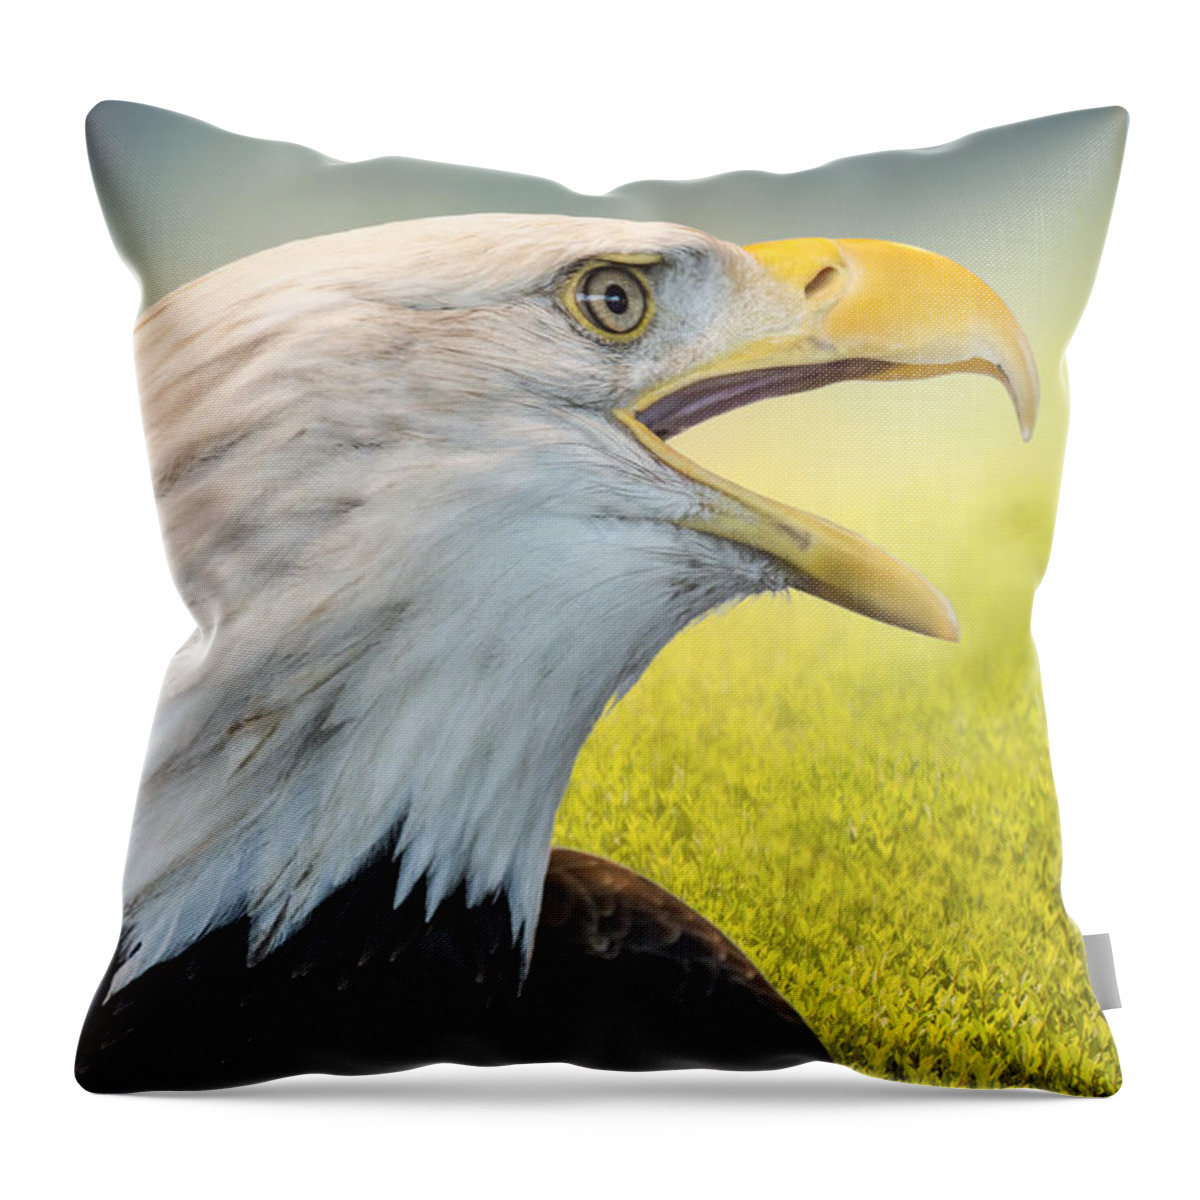 Eagle Throw Pillow featuring the photograph Baldy In The Meadow by Bill and Linda Tiepelman